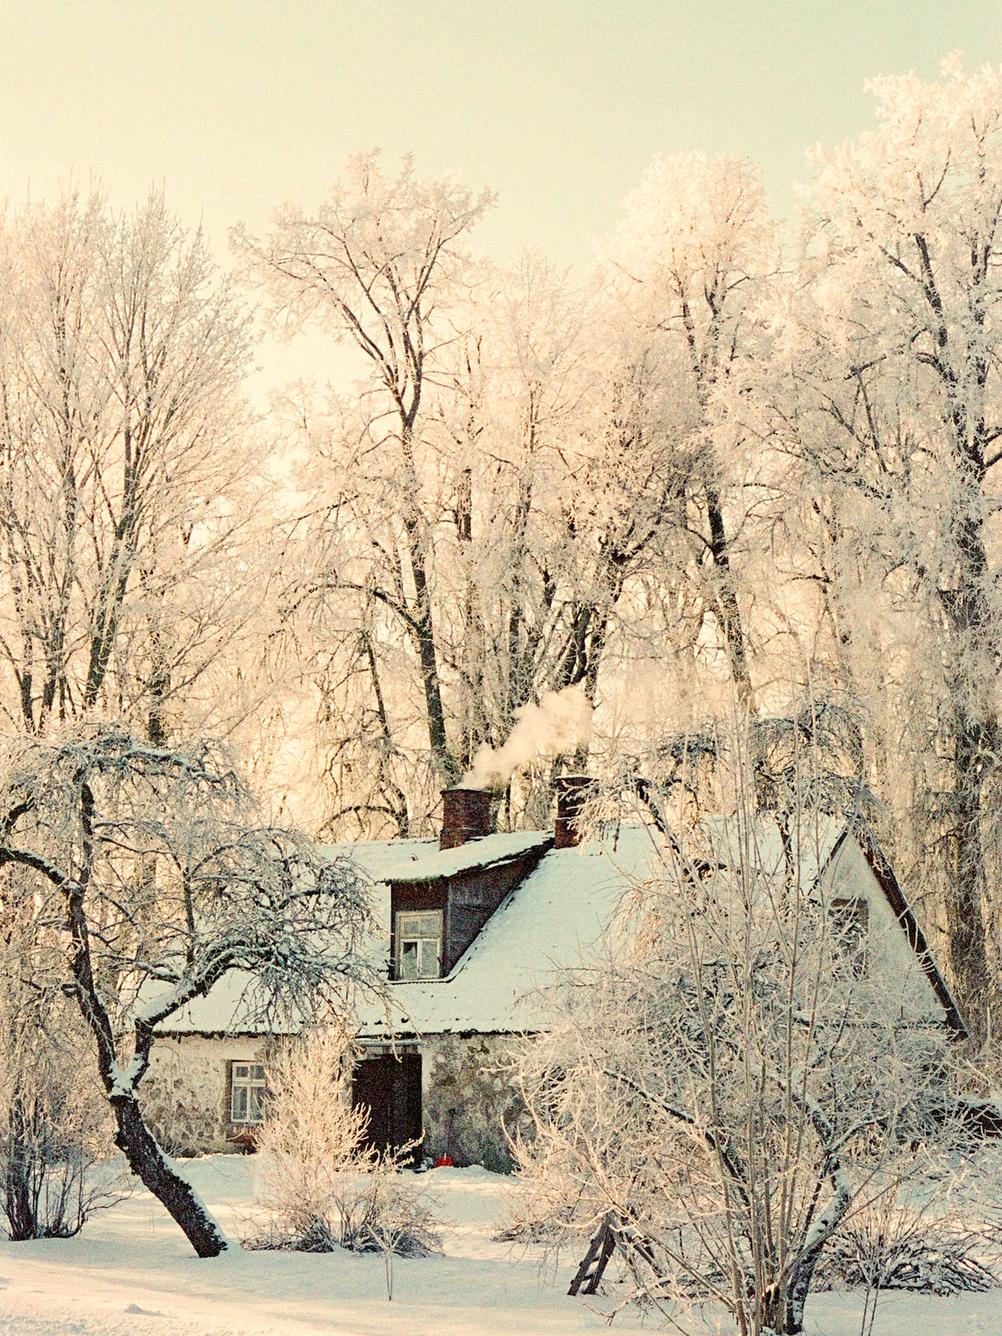 Photo of a house surrounded by trees and snow.